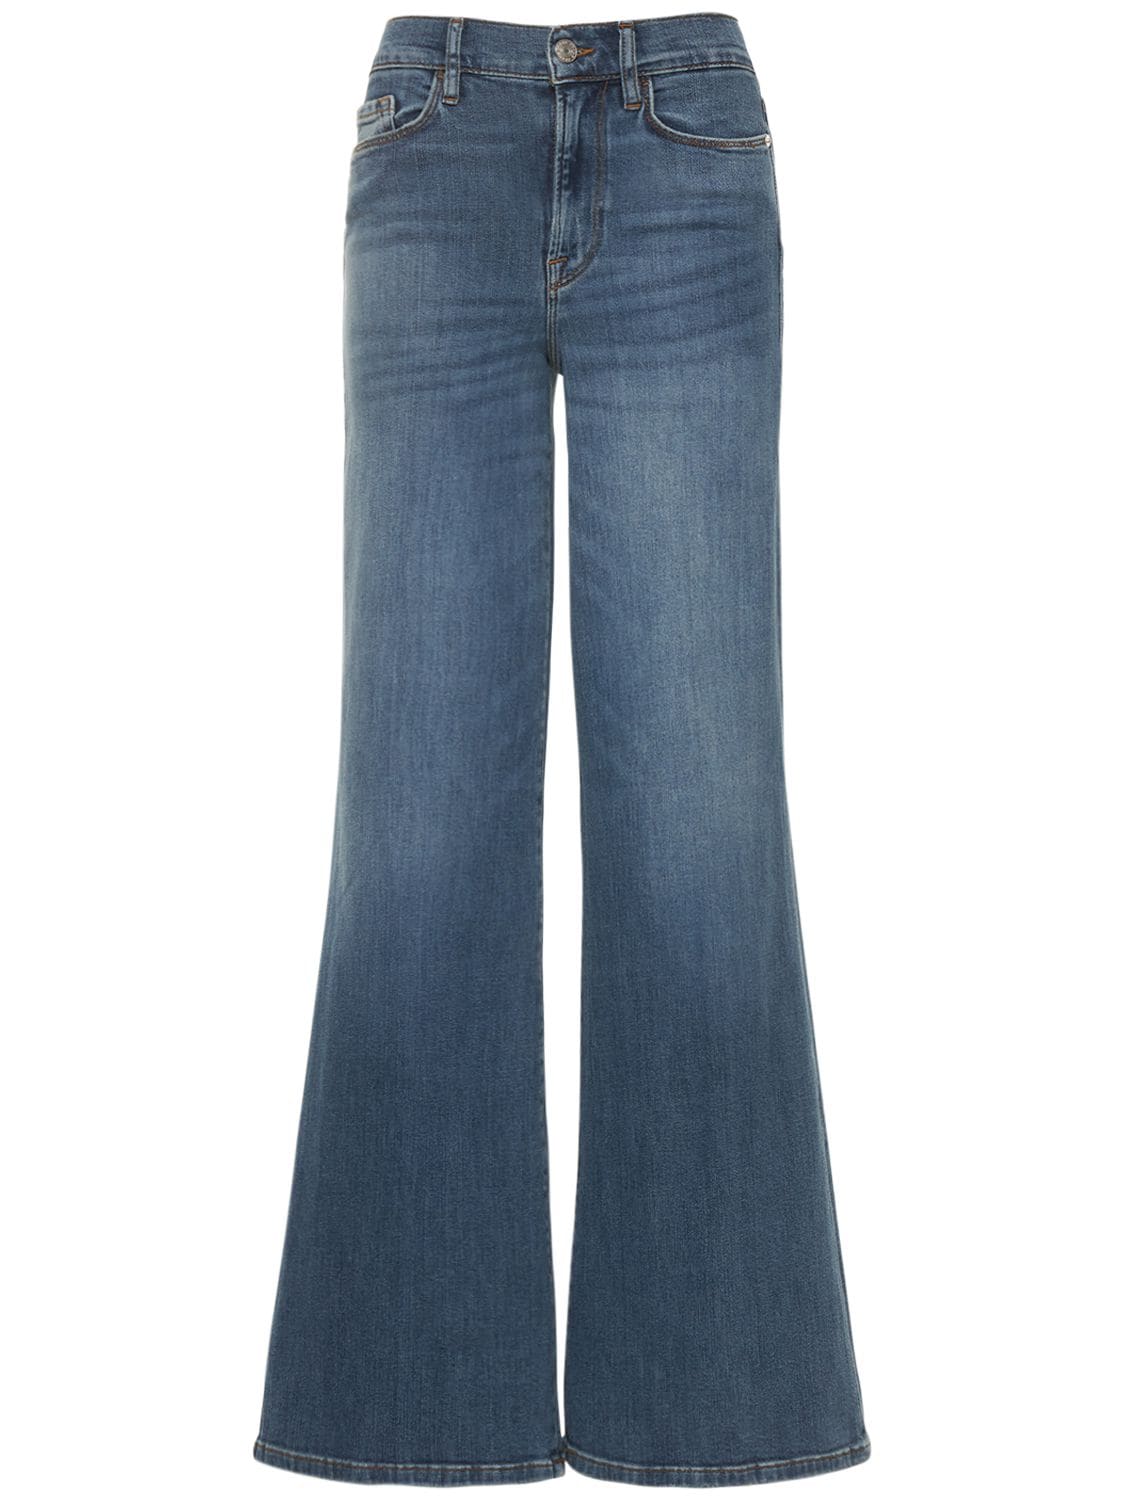 FRAME Le Palazzo Wide Leg Jeans